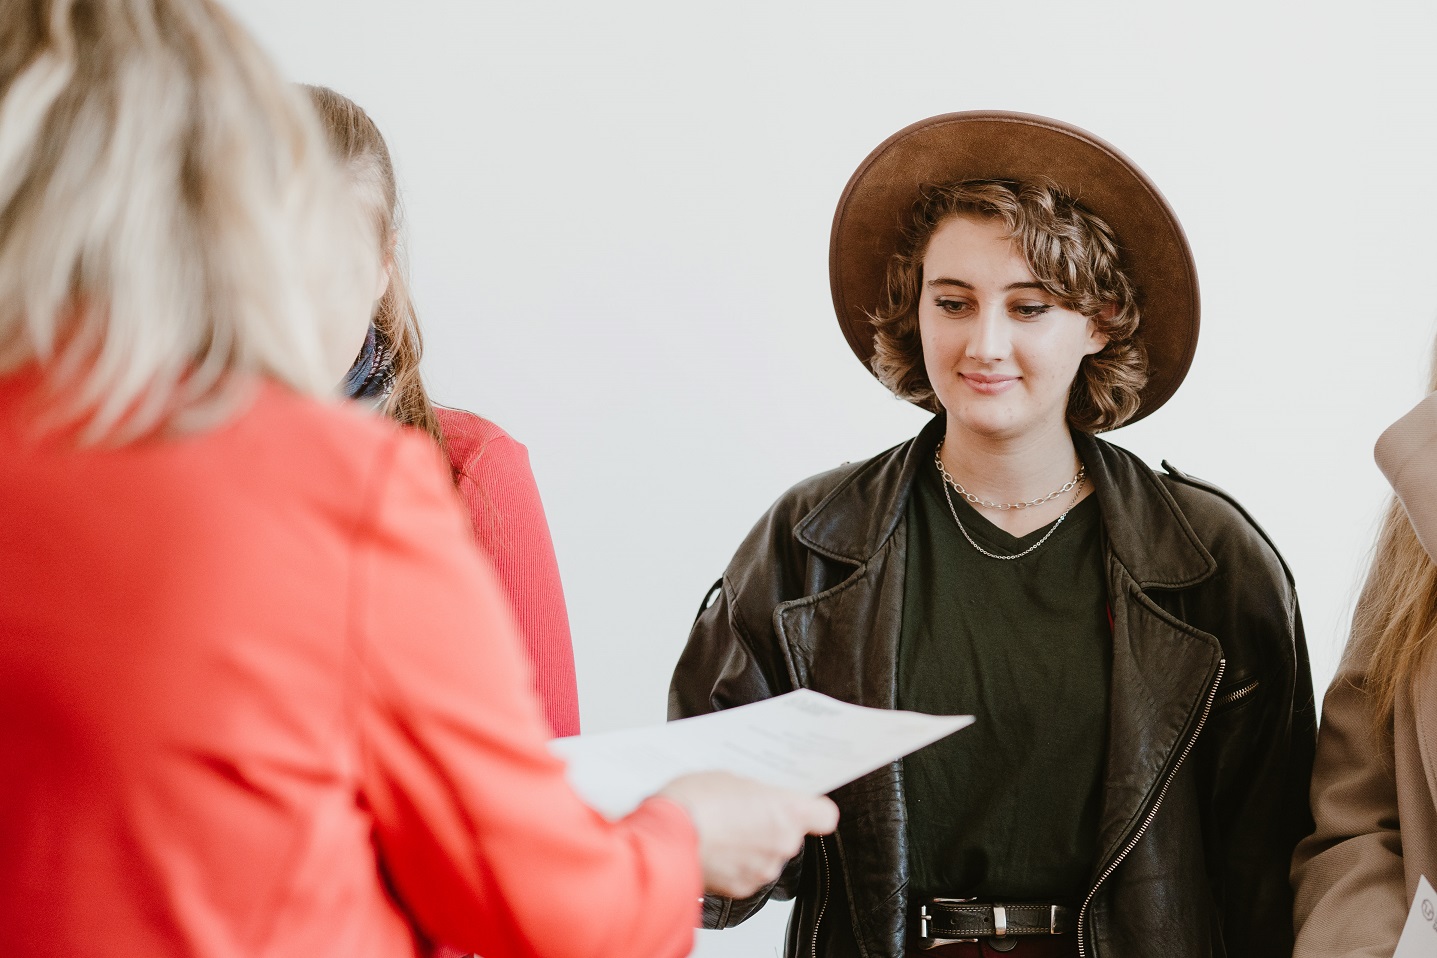 Photograph of a girl wearing a hat receiving a paper from a person